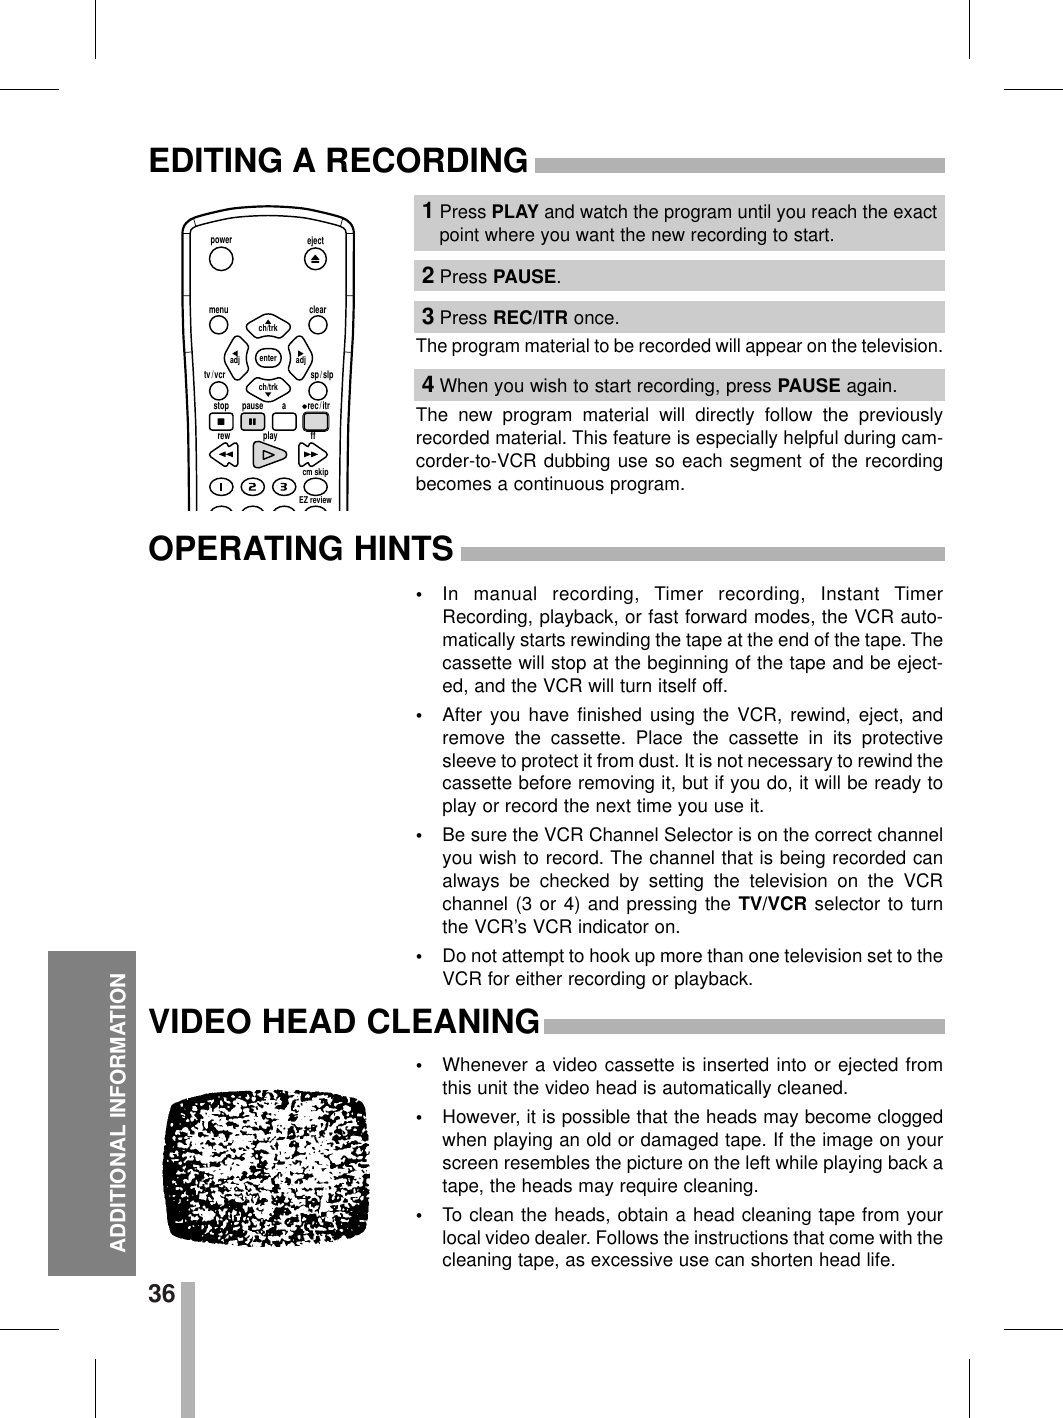 36ADDITIONAL INFORMATIONEDITING A RECORDINGOPERATING HINTSThe program material to be recorded will appear on the television.The new program material will directly follow the previouslyrecorded material. This feature is especially helpful during cam-corder-to-VCR dubbing use so each segment of the recordingbecomes a continuous program.•In manual recording, Timer recording, Instant TimerRecording, playback, or fast forward modes, the VCR auto-matically starts rewinding the tape at the end of the tape. Thecassette will stop at the beginning of the tape and be eject-ed, and the VCR will turn itself off.•After you have finished using the VCR, rewind, eject, andremove the cassette. Place the cassette in its protectivesleeve to protect it from dust. It is not necessary to rewind thecassette before removing it, but if you do, it will be ready toplay or record the next time you use it.•Be sure the VCR Channel Selector is on the correct channelyou wish to record. The channel that is being recorded canalways be checked by setting the television on the VCRchannel (3 or 4) and pressing the TV/VCR selector to turnthe VCR’s VCR indicator on.•Do not attempt to hook up more than one television set to theVCR for either recording or playback.1Press PLAY and watch the program until you reach the exactpoint where you want the new recording to start.2Press PAUSE.3Press REC/ITR once.4When you wish to start recording, press PAUSE again.ejectpowermenu clearsp / slptv / vcrstoprew play ffcm skipEZ reviewpause a rec / itrch/trkadjenterch/trkadjVIDEO HEAD CLEANING•Whenever a video cassette is inserted into or ejected fromthis unit the video head is automatically cleaned.•However, it is possible that the heads may become cloggedwhen playing an old or damaged tape. If the image on yourscreen resembles the picture on the left while playing back atape, the heads may require cleaning.•To clean the heads, obtain a head cleaning tape from yourlocal video dealer. Follows the instructions that come with thecleaning tape, as excessive use can shorten head life.